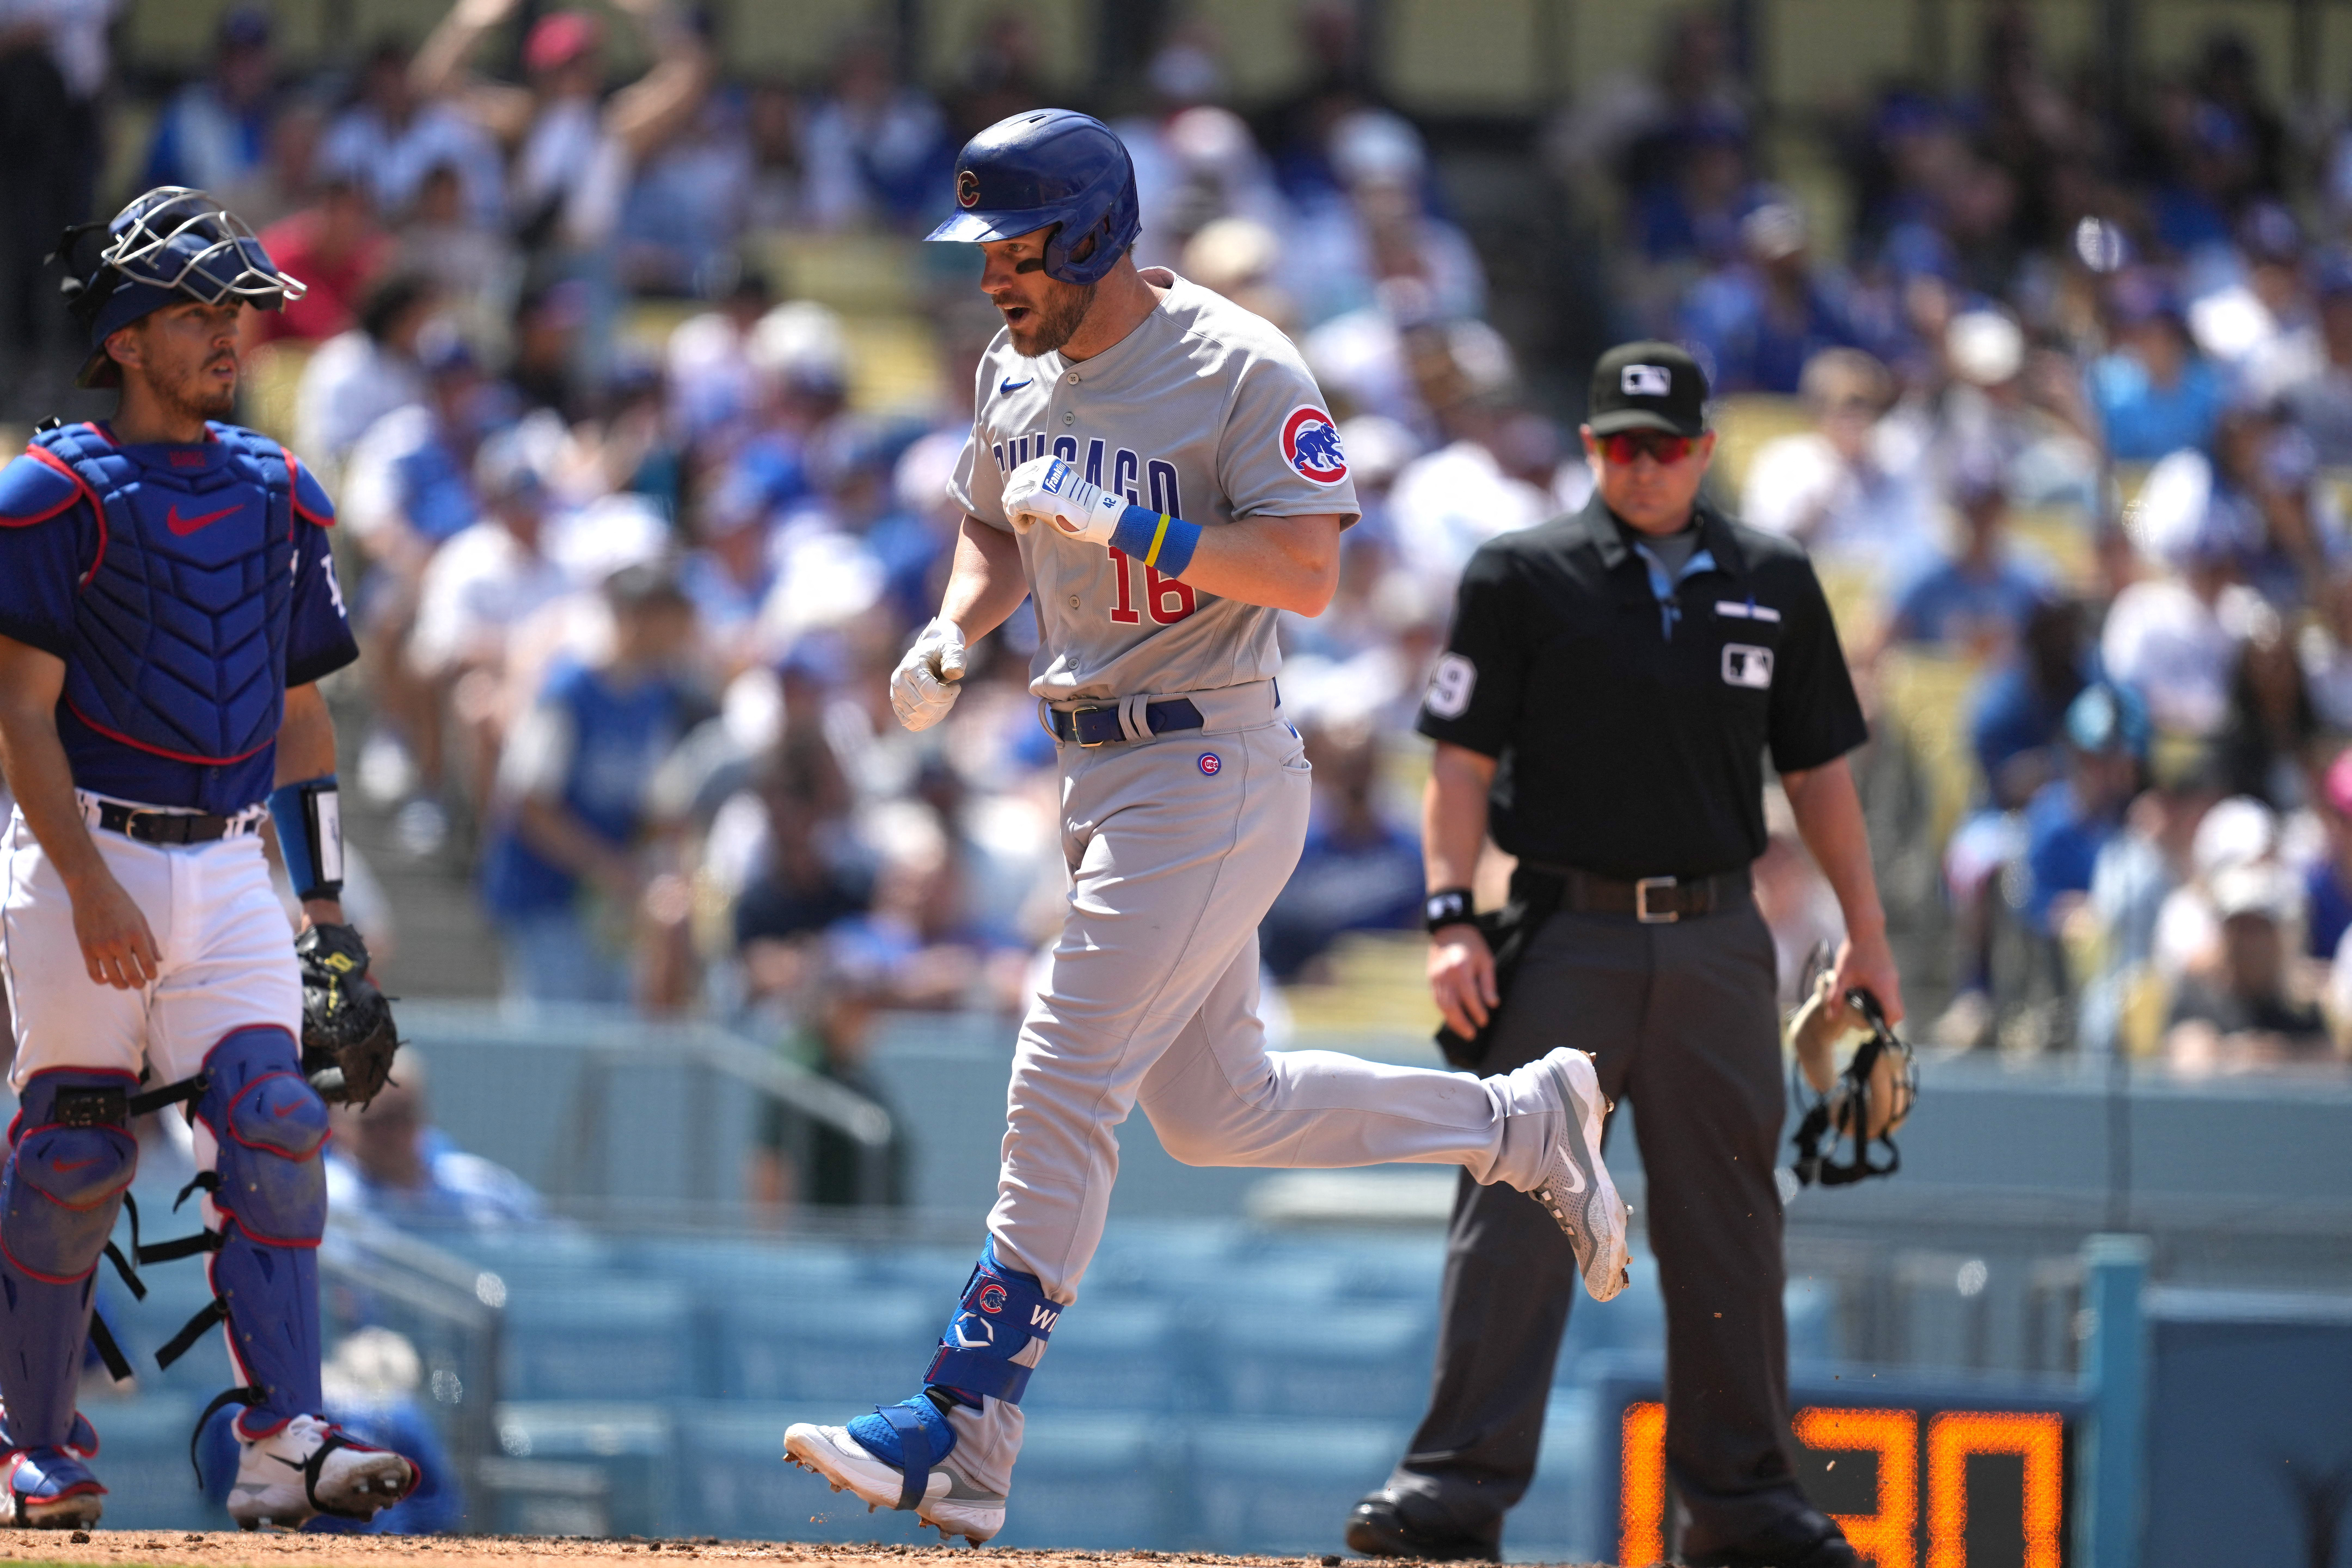 Back-to-back blasts give Cubs series win over Dodgers